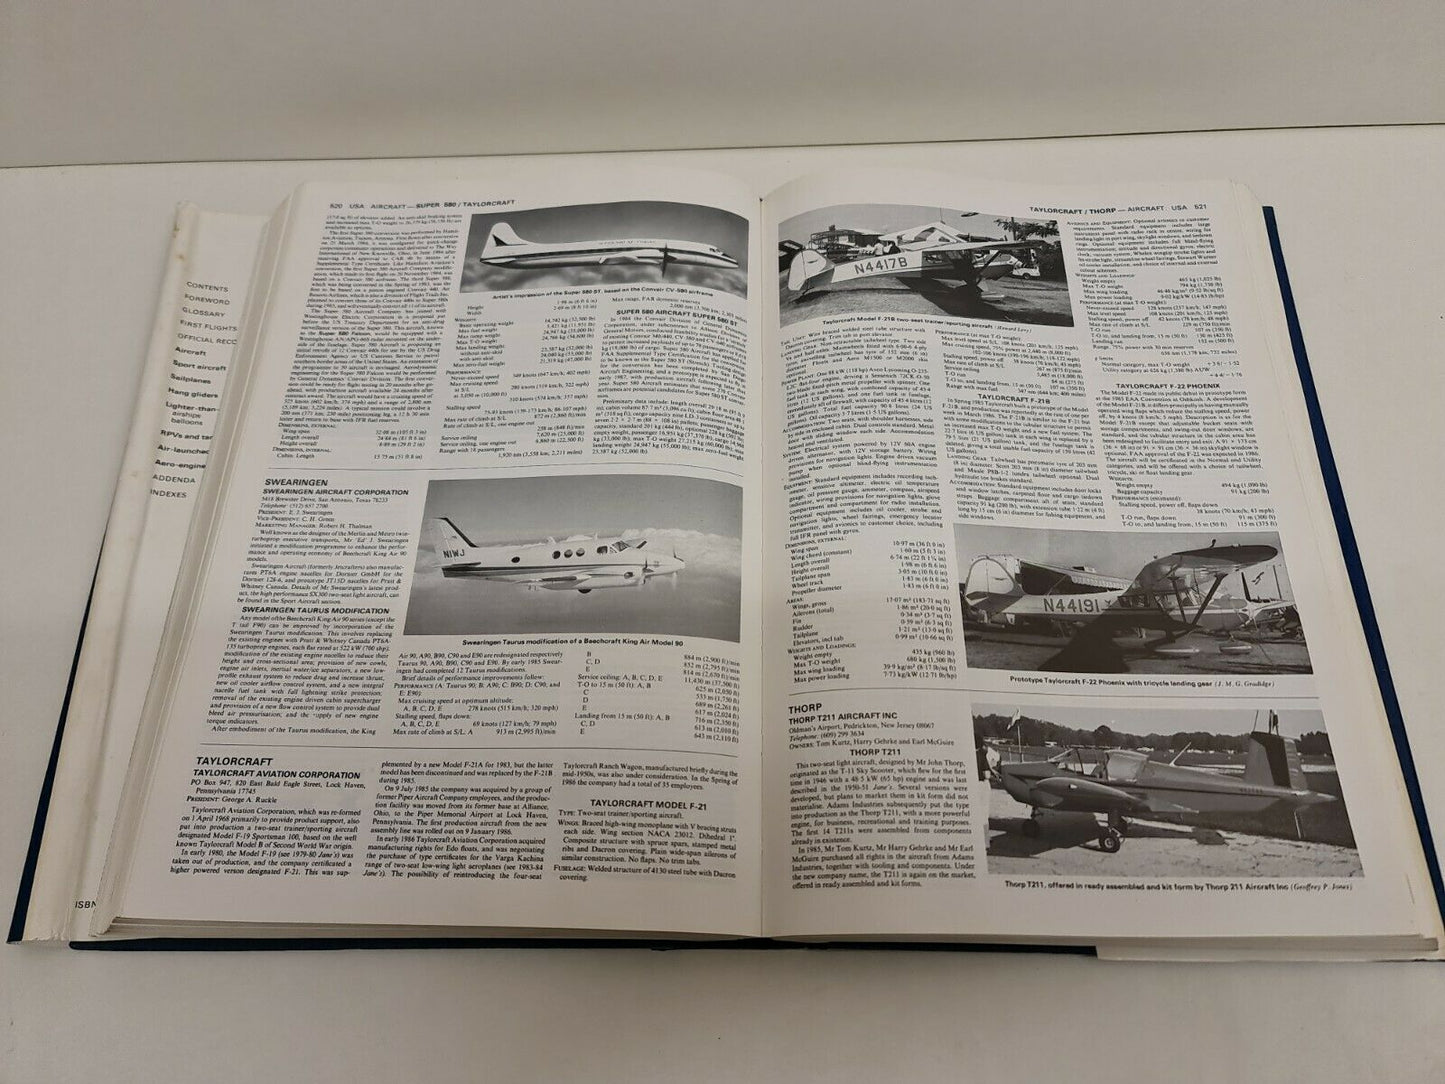 Jane's All the World's Aircraft 1986-87 by John Taylor